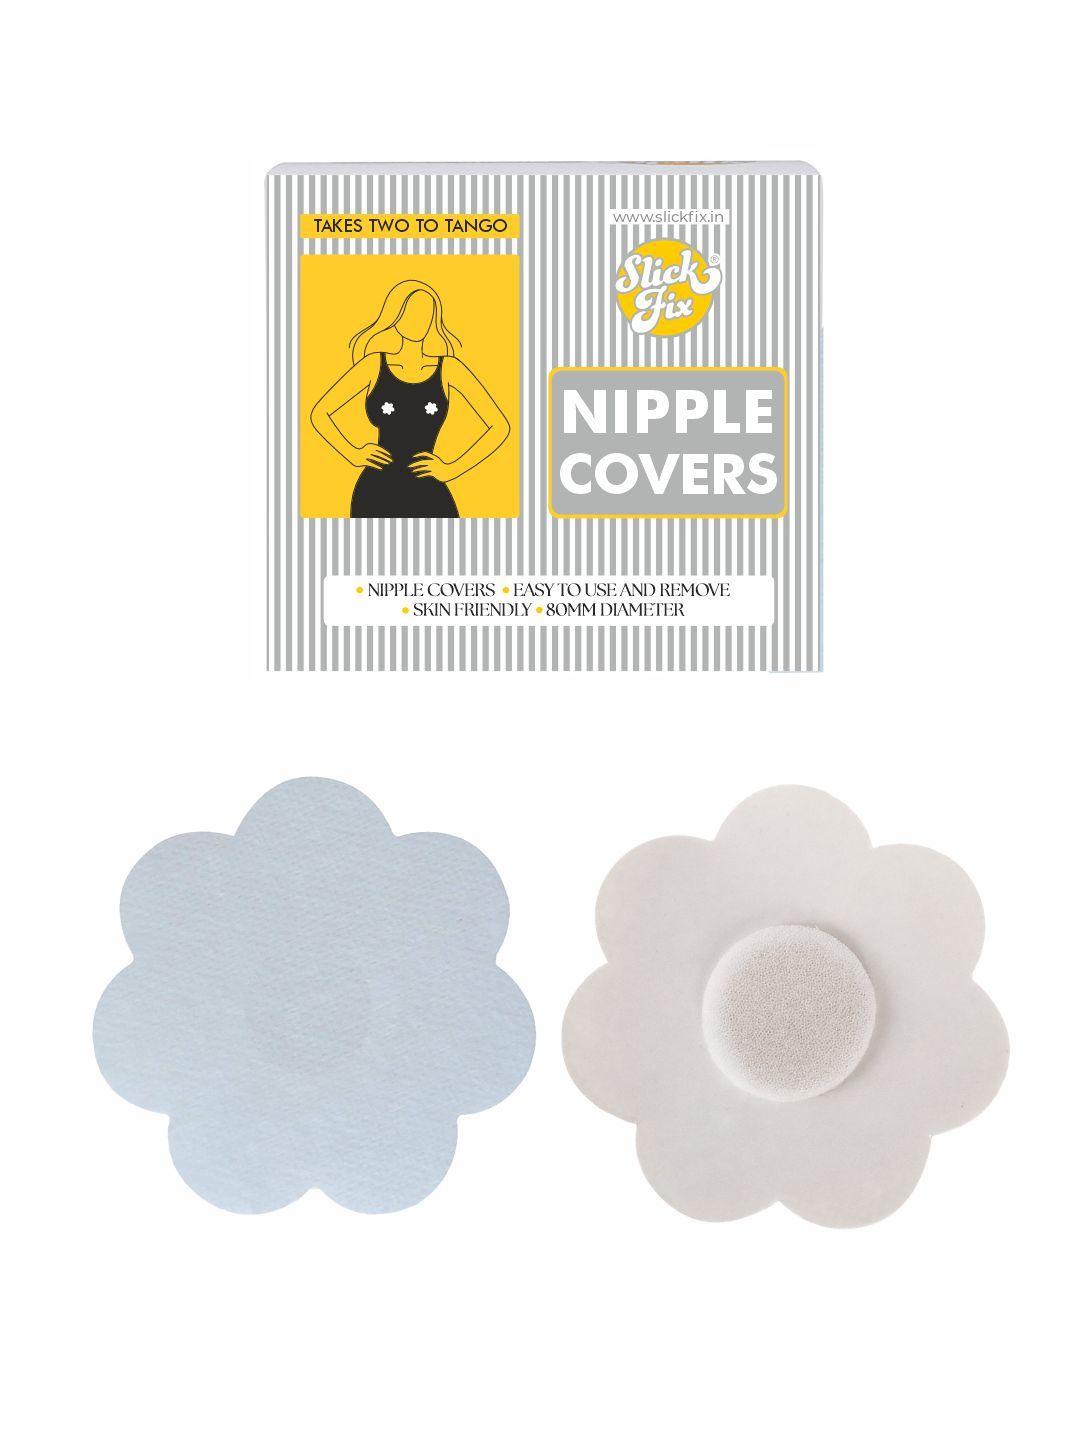 slickfix self adhesive nipple covers white colour nipple pasties - 10 pieces